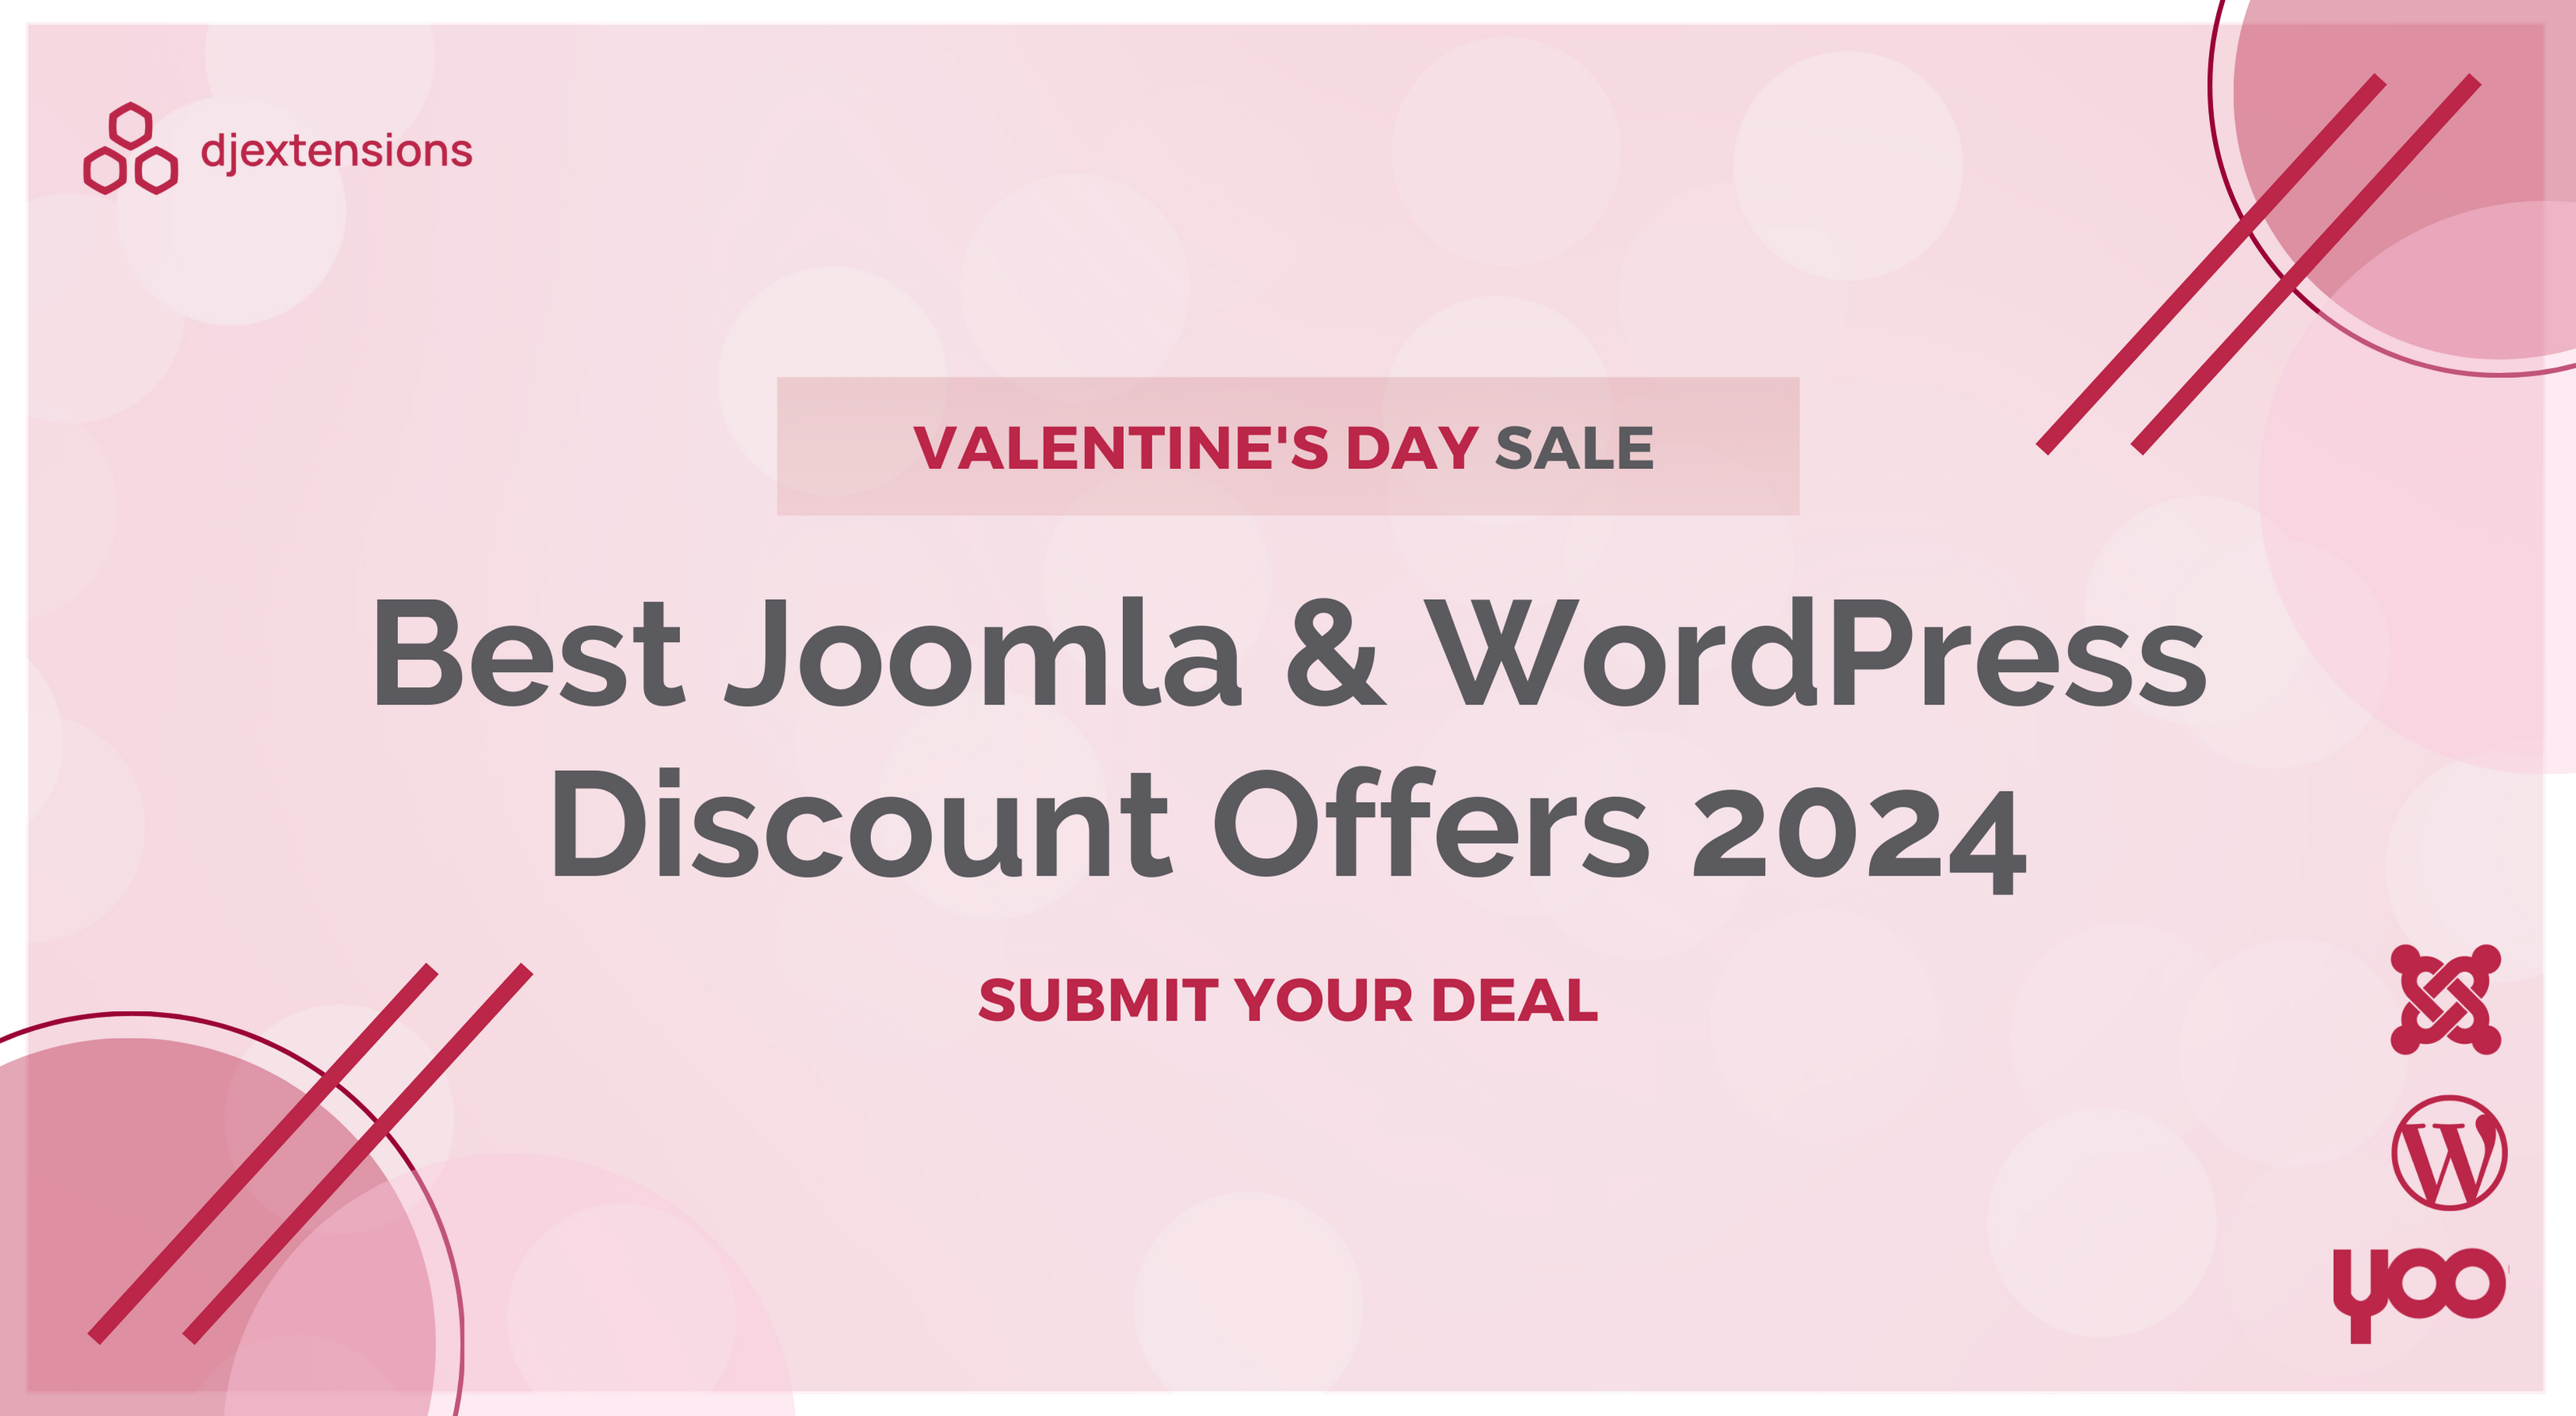 Valentine's Day Discount Offers 2024 - SUBMIT YOUR DEAL!